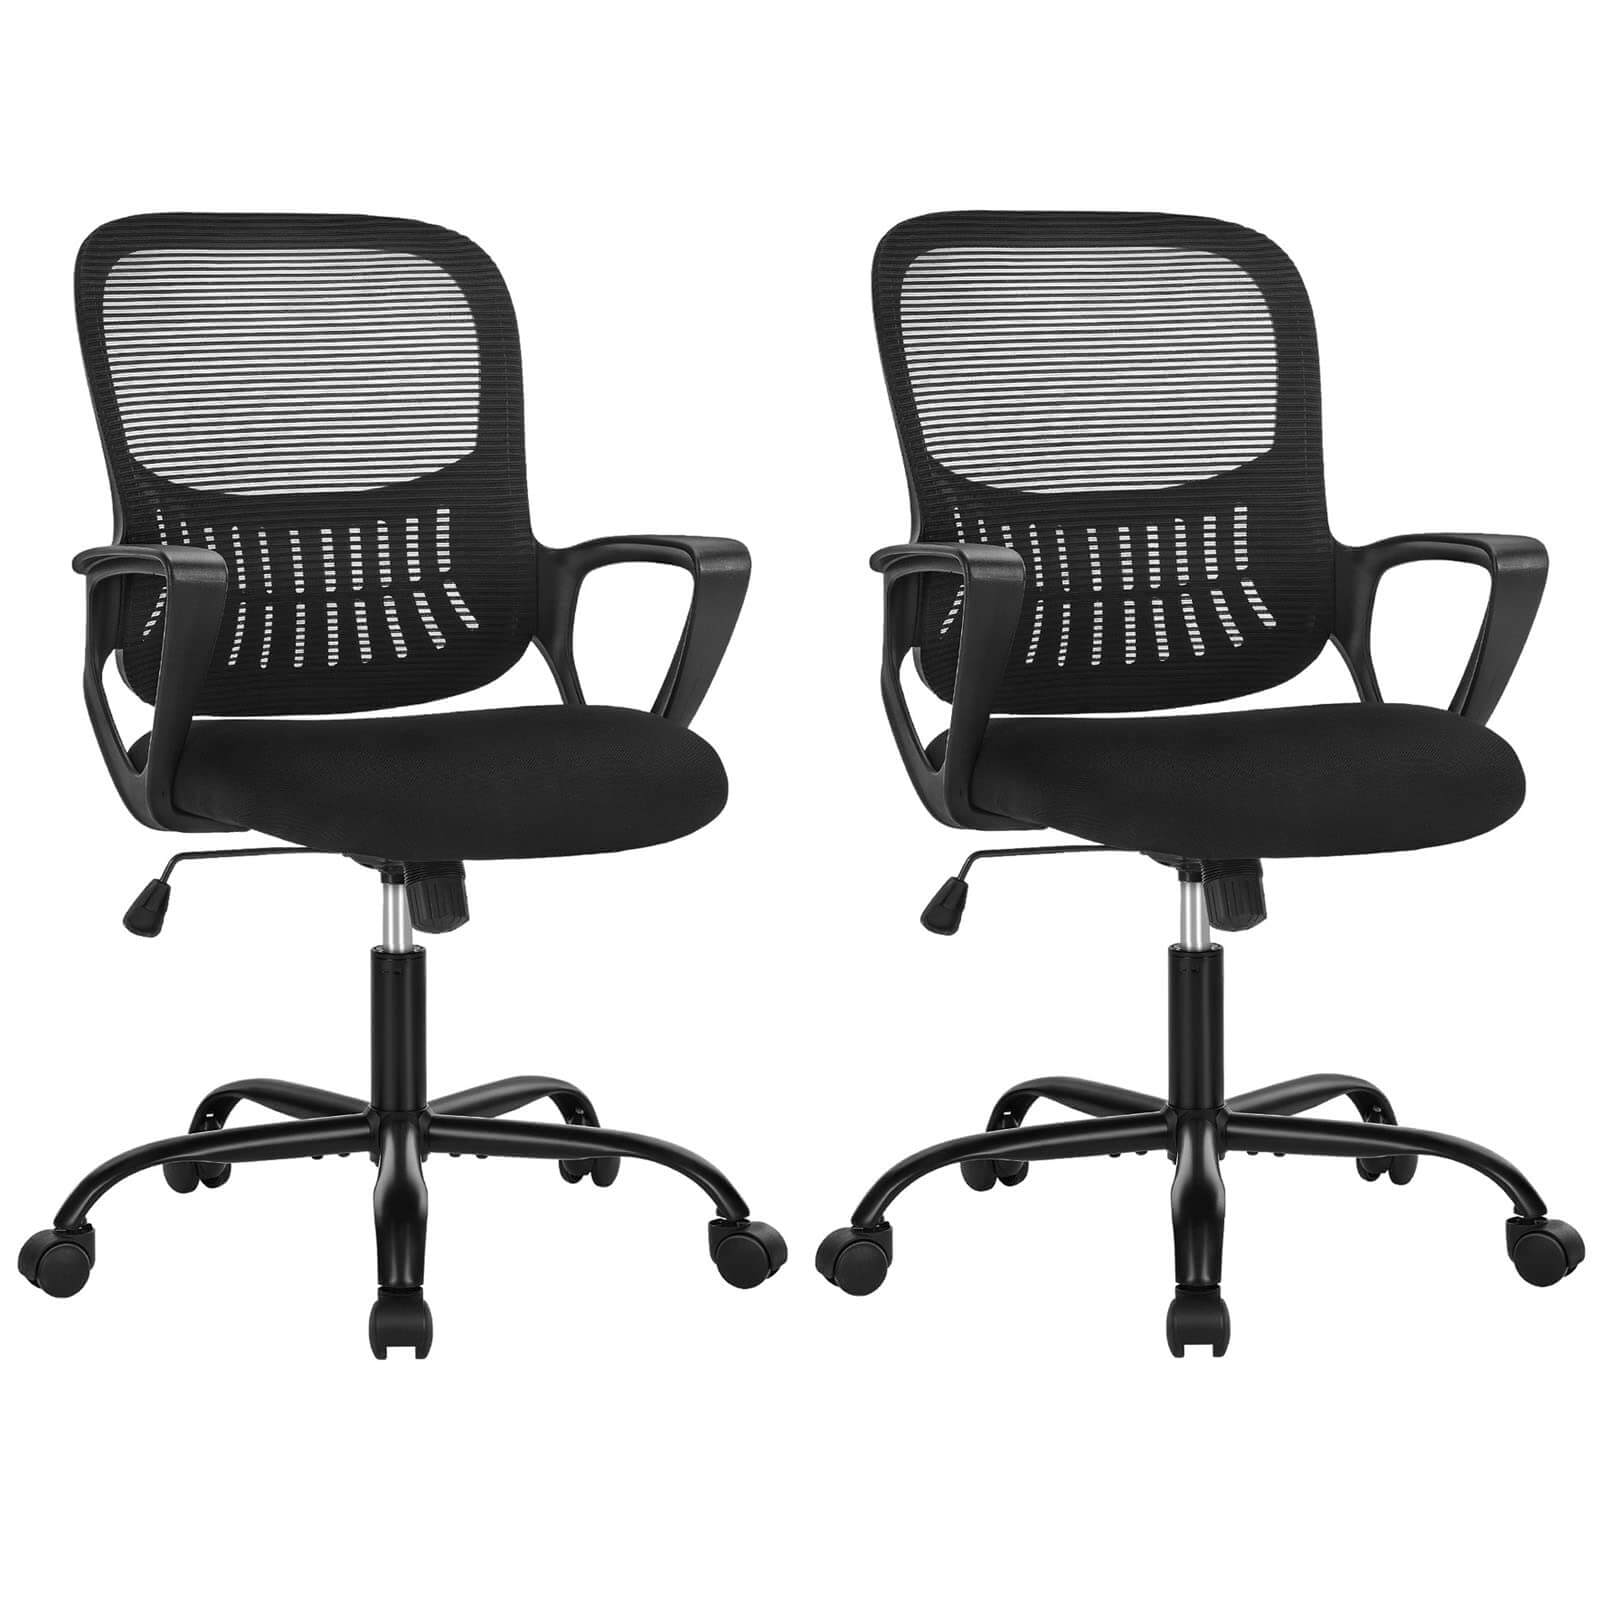  SOCUY Office Chair Computer Chair Task Chair Desk Chair Office  Chair Comfortable Computer Chair Home Back Chair Neck Support Office Chair  Waist Engineering Chair Desk Chair Work Chair (Color : Black) 